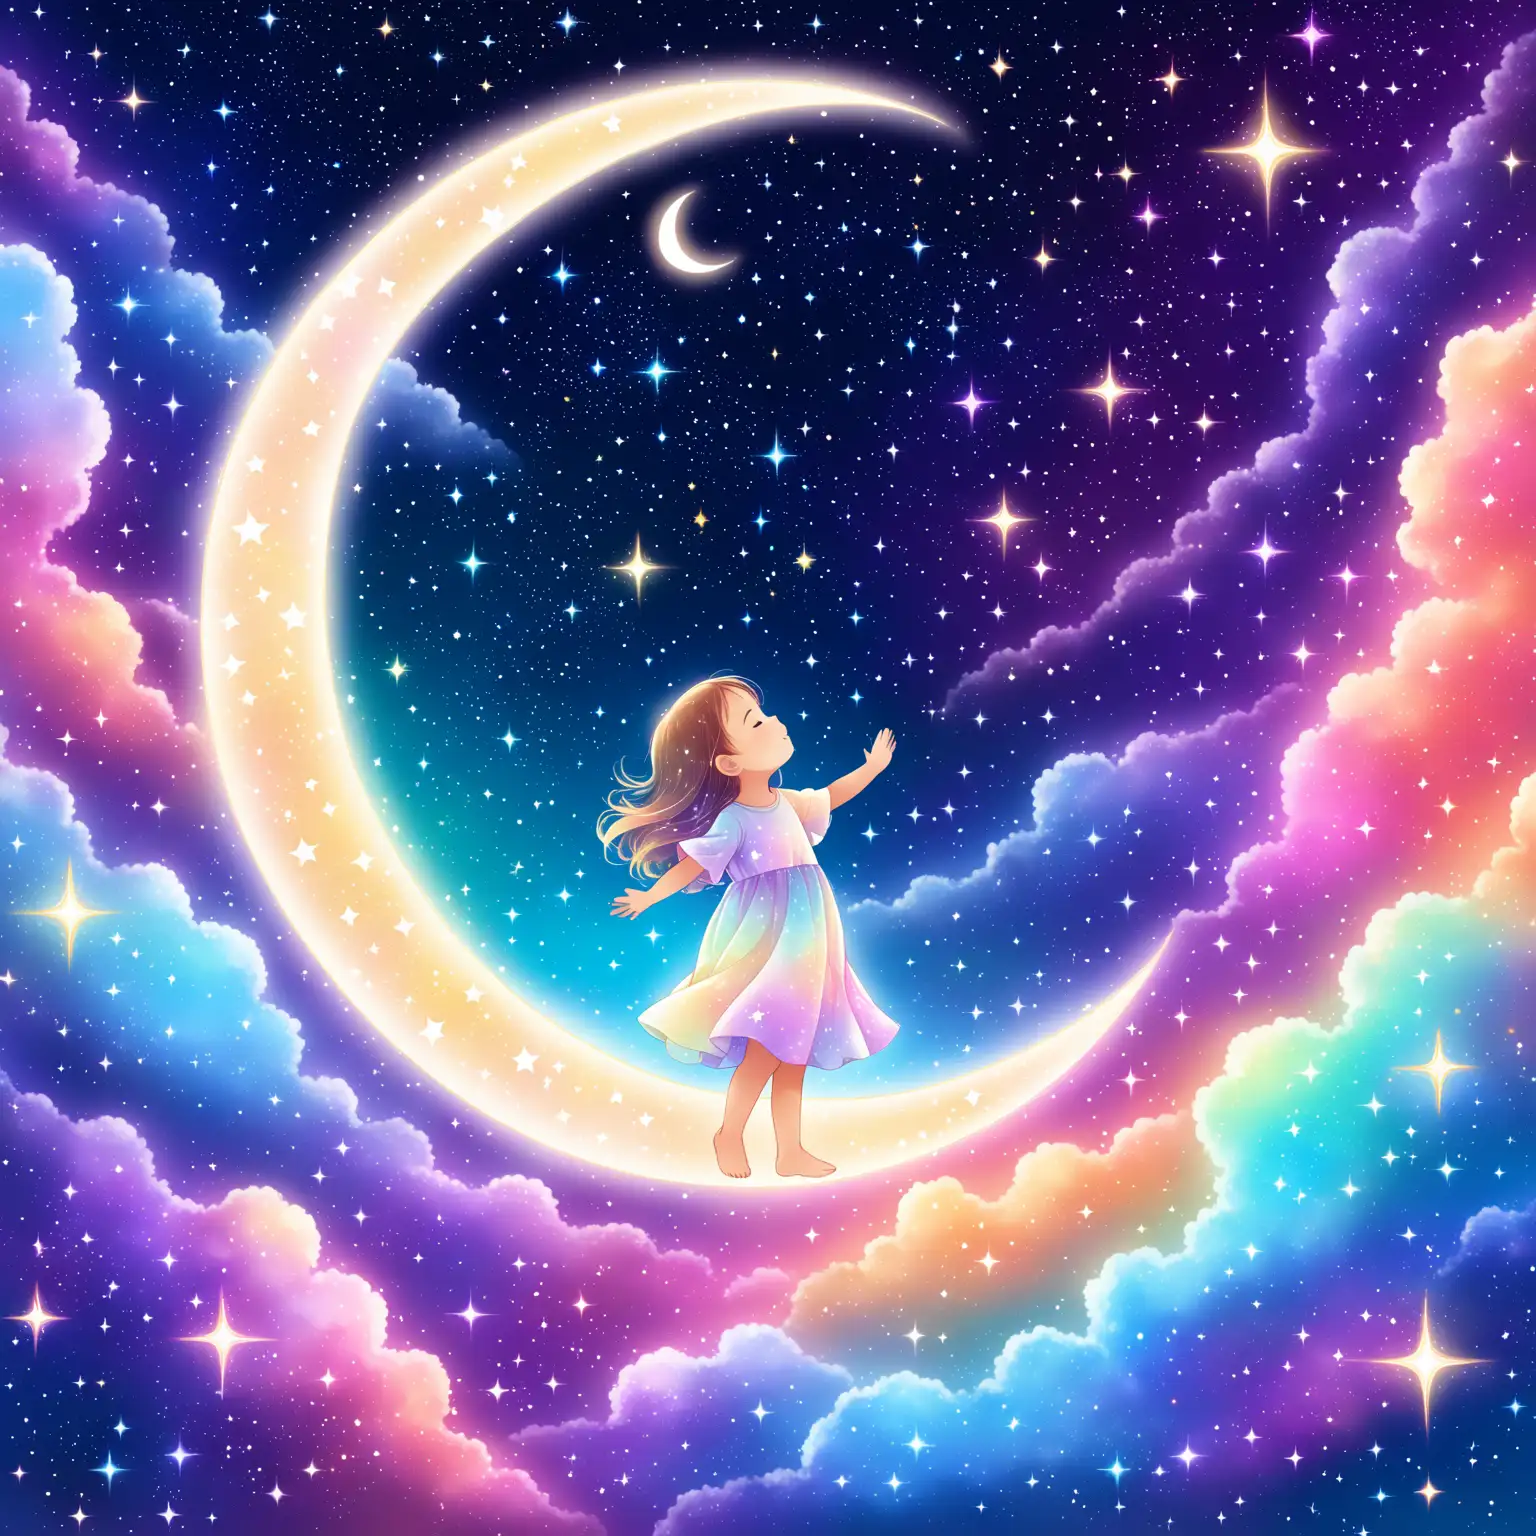 Celestial Dreams": A whimsical design featuring a child gazing up at a starry sky filled with twinkling constellations and a crescent moon, with colorful nebula clouds swirling in the background On transparent
white background

